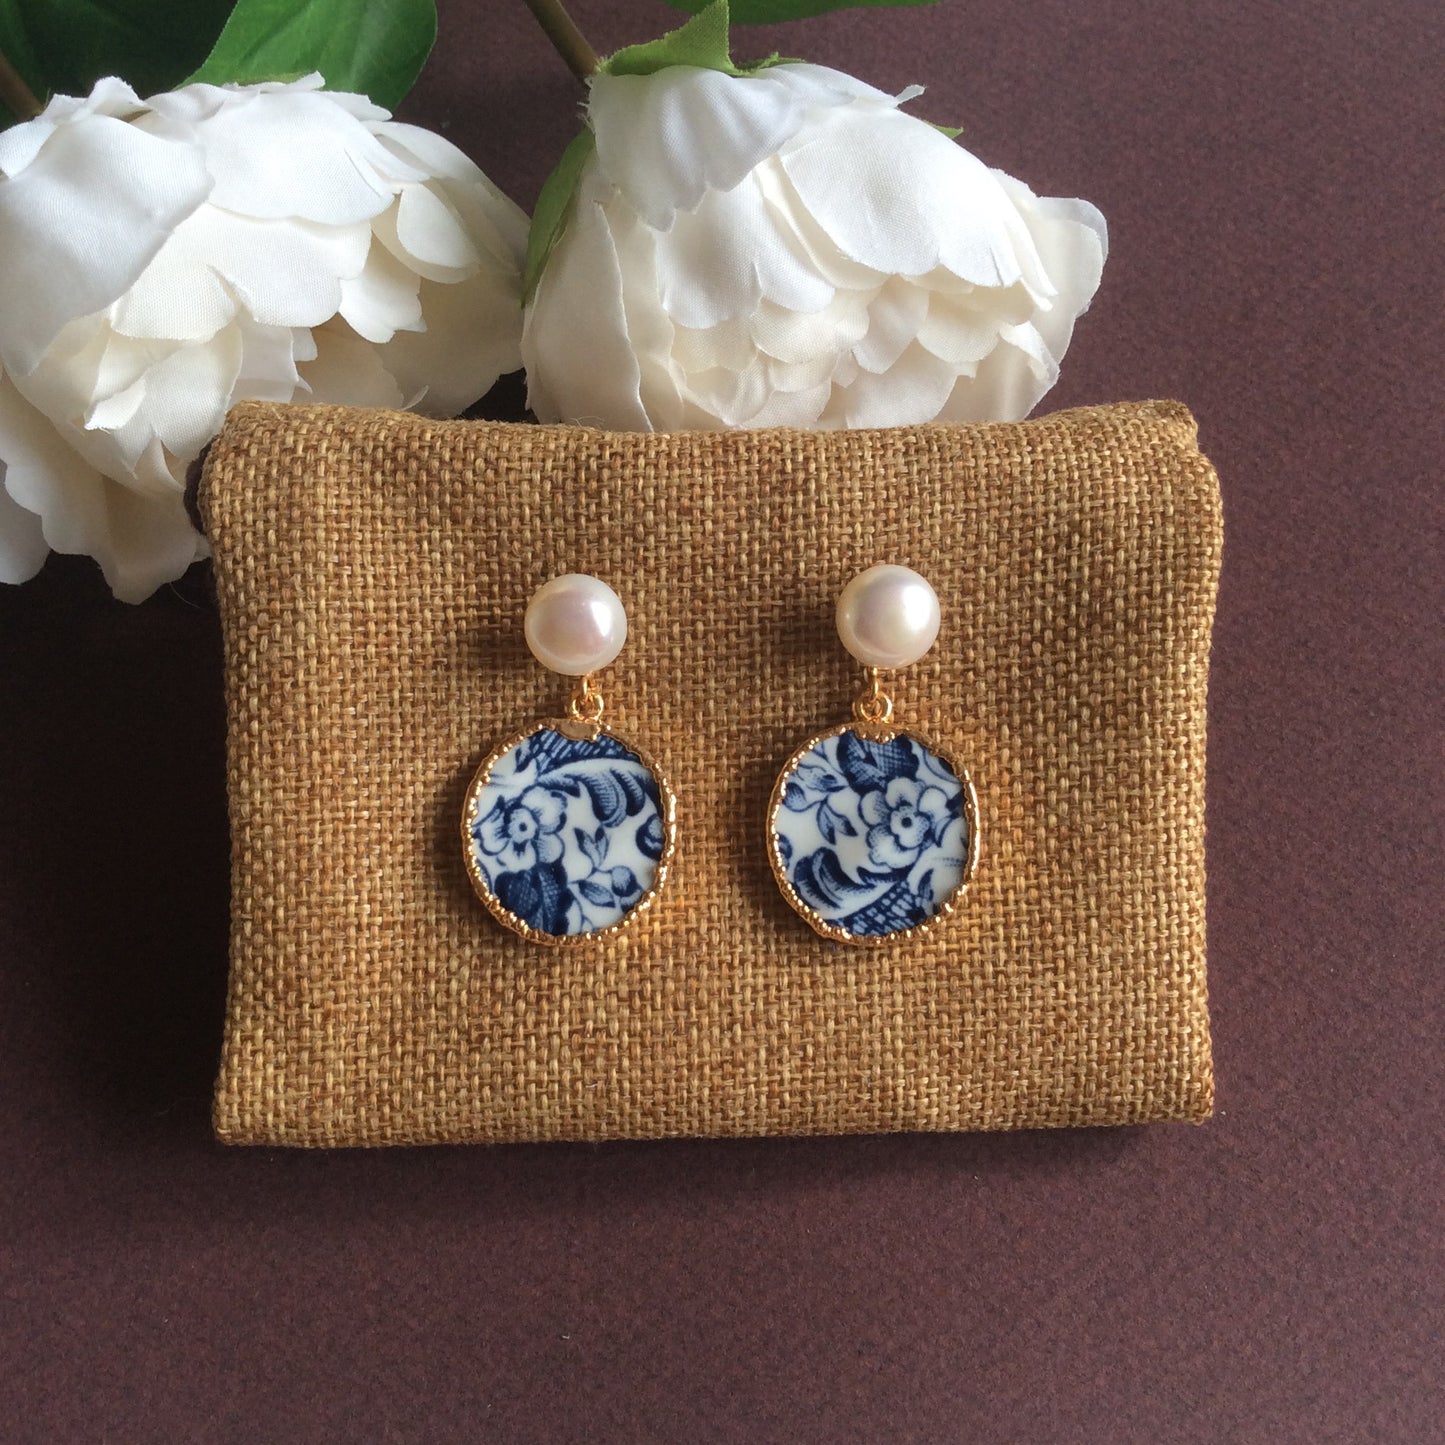 Blue and white Azulejos porcelain with freshwater pearl studs